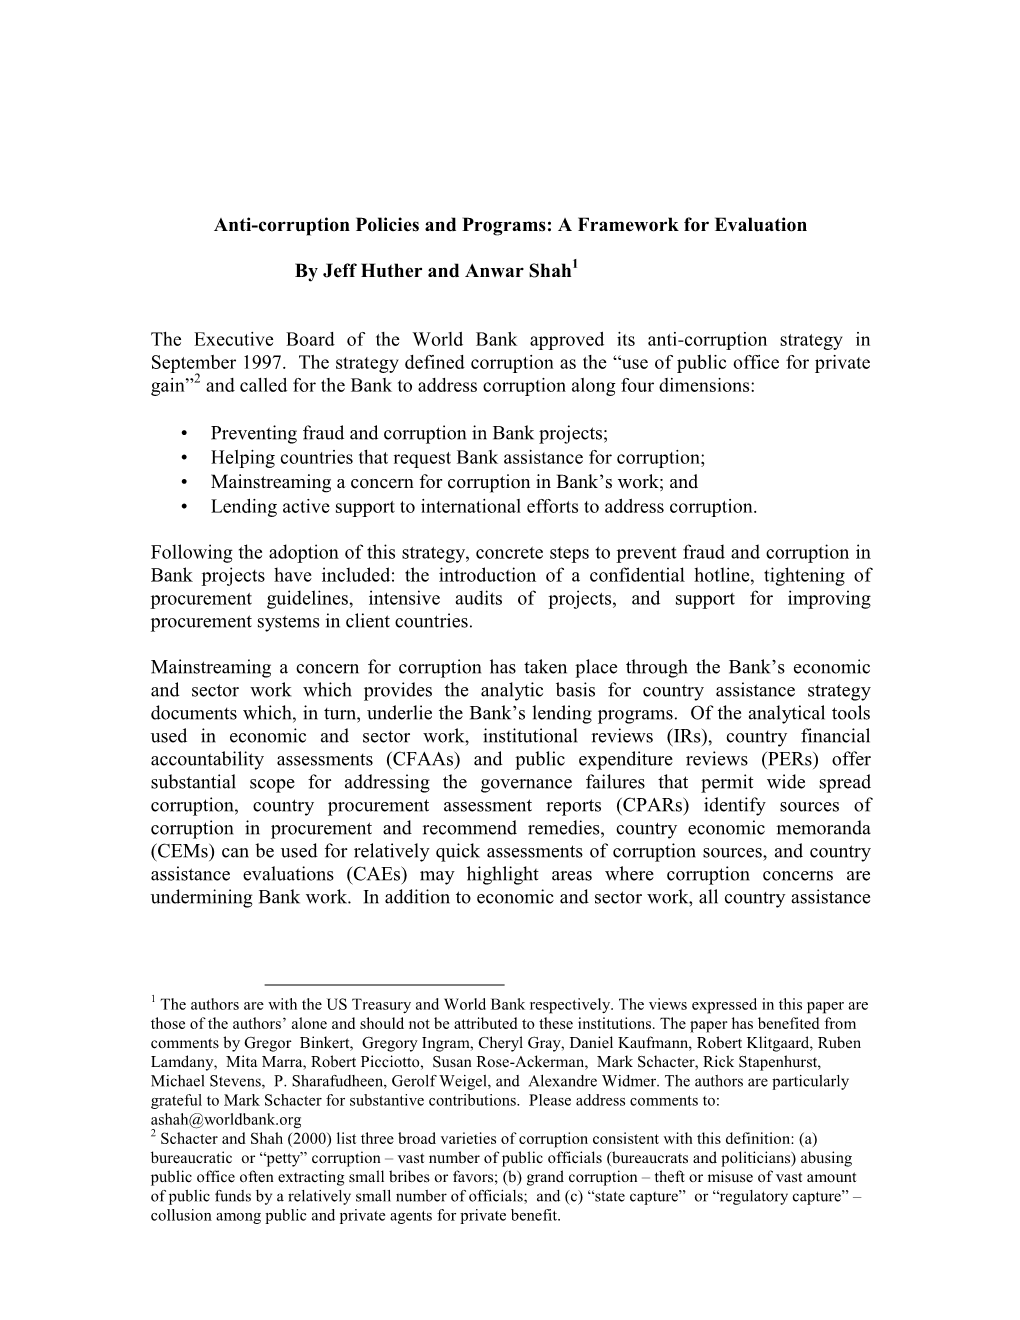 Anti-Corruption Policies and Programs: a Framework for Evaluation